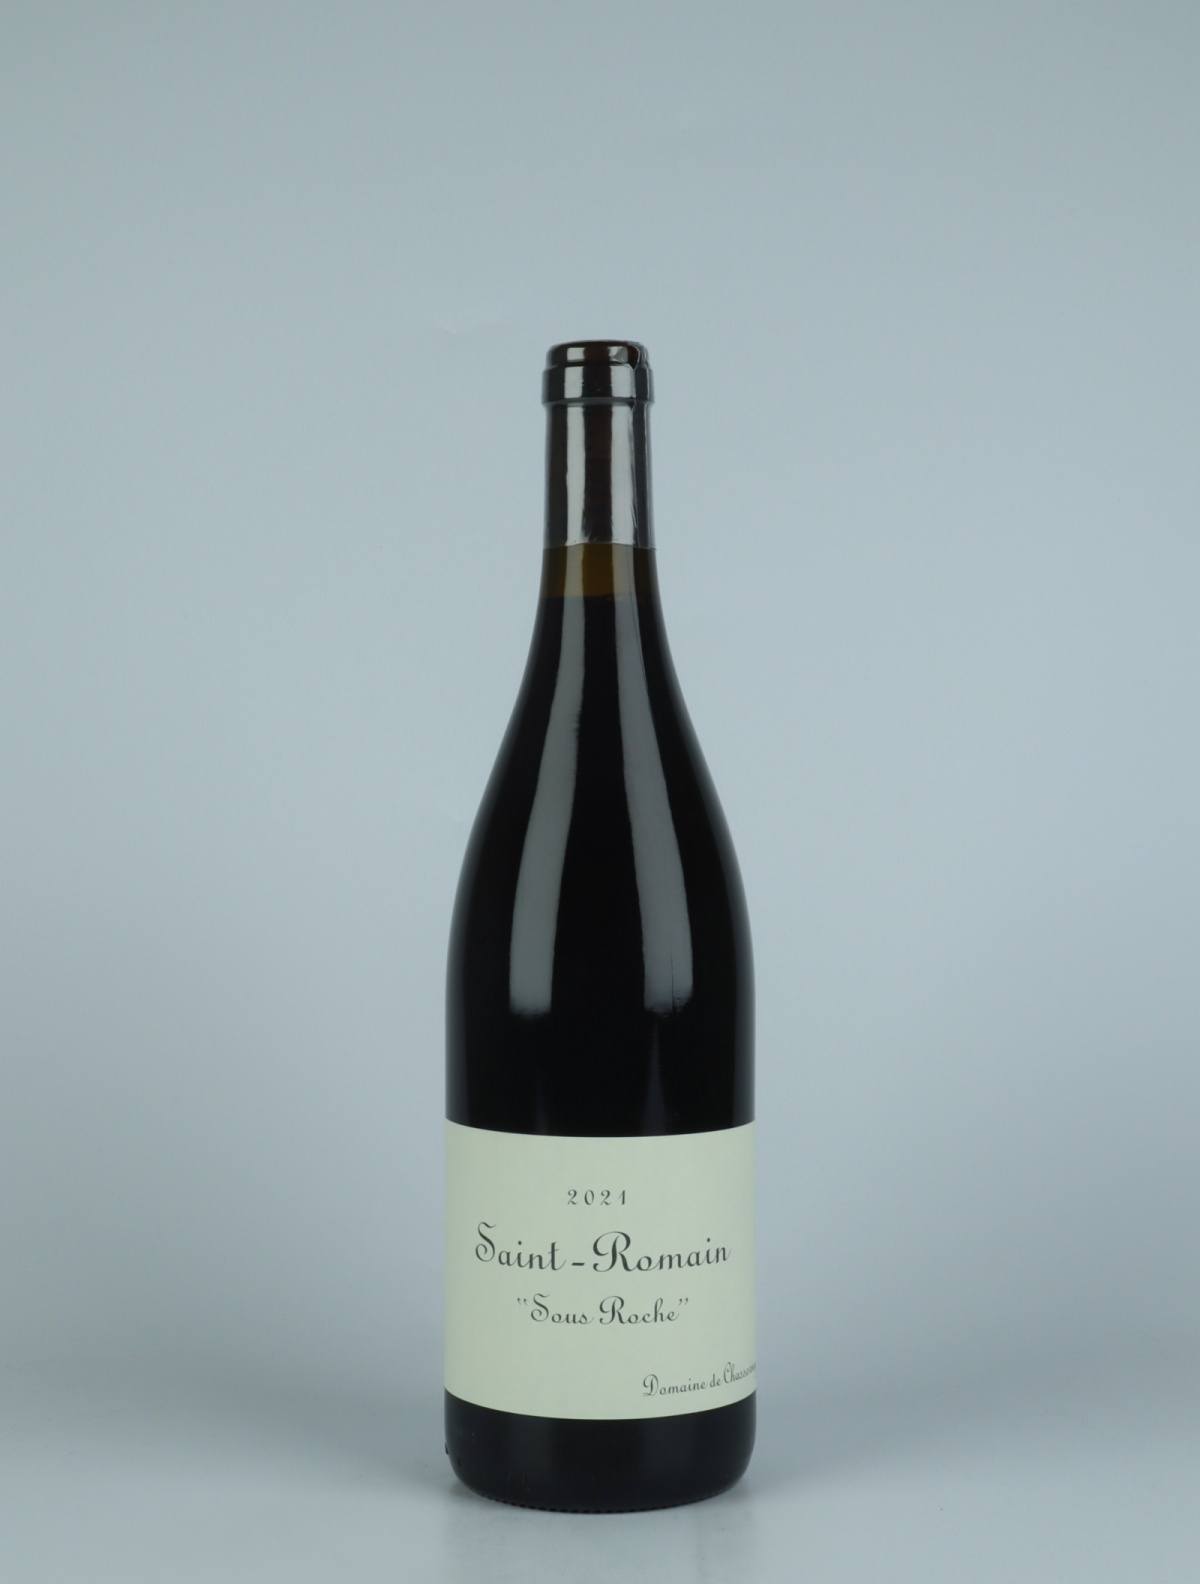 A bottle 2021 Saint Romain Rouge - Sous Roche Red wine from Domaine de Chassorney, Burgundy in France